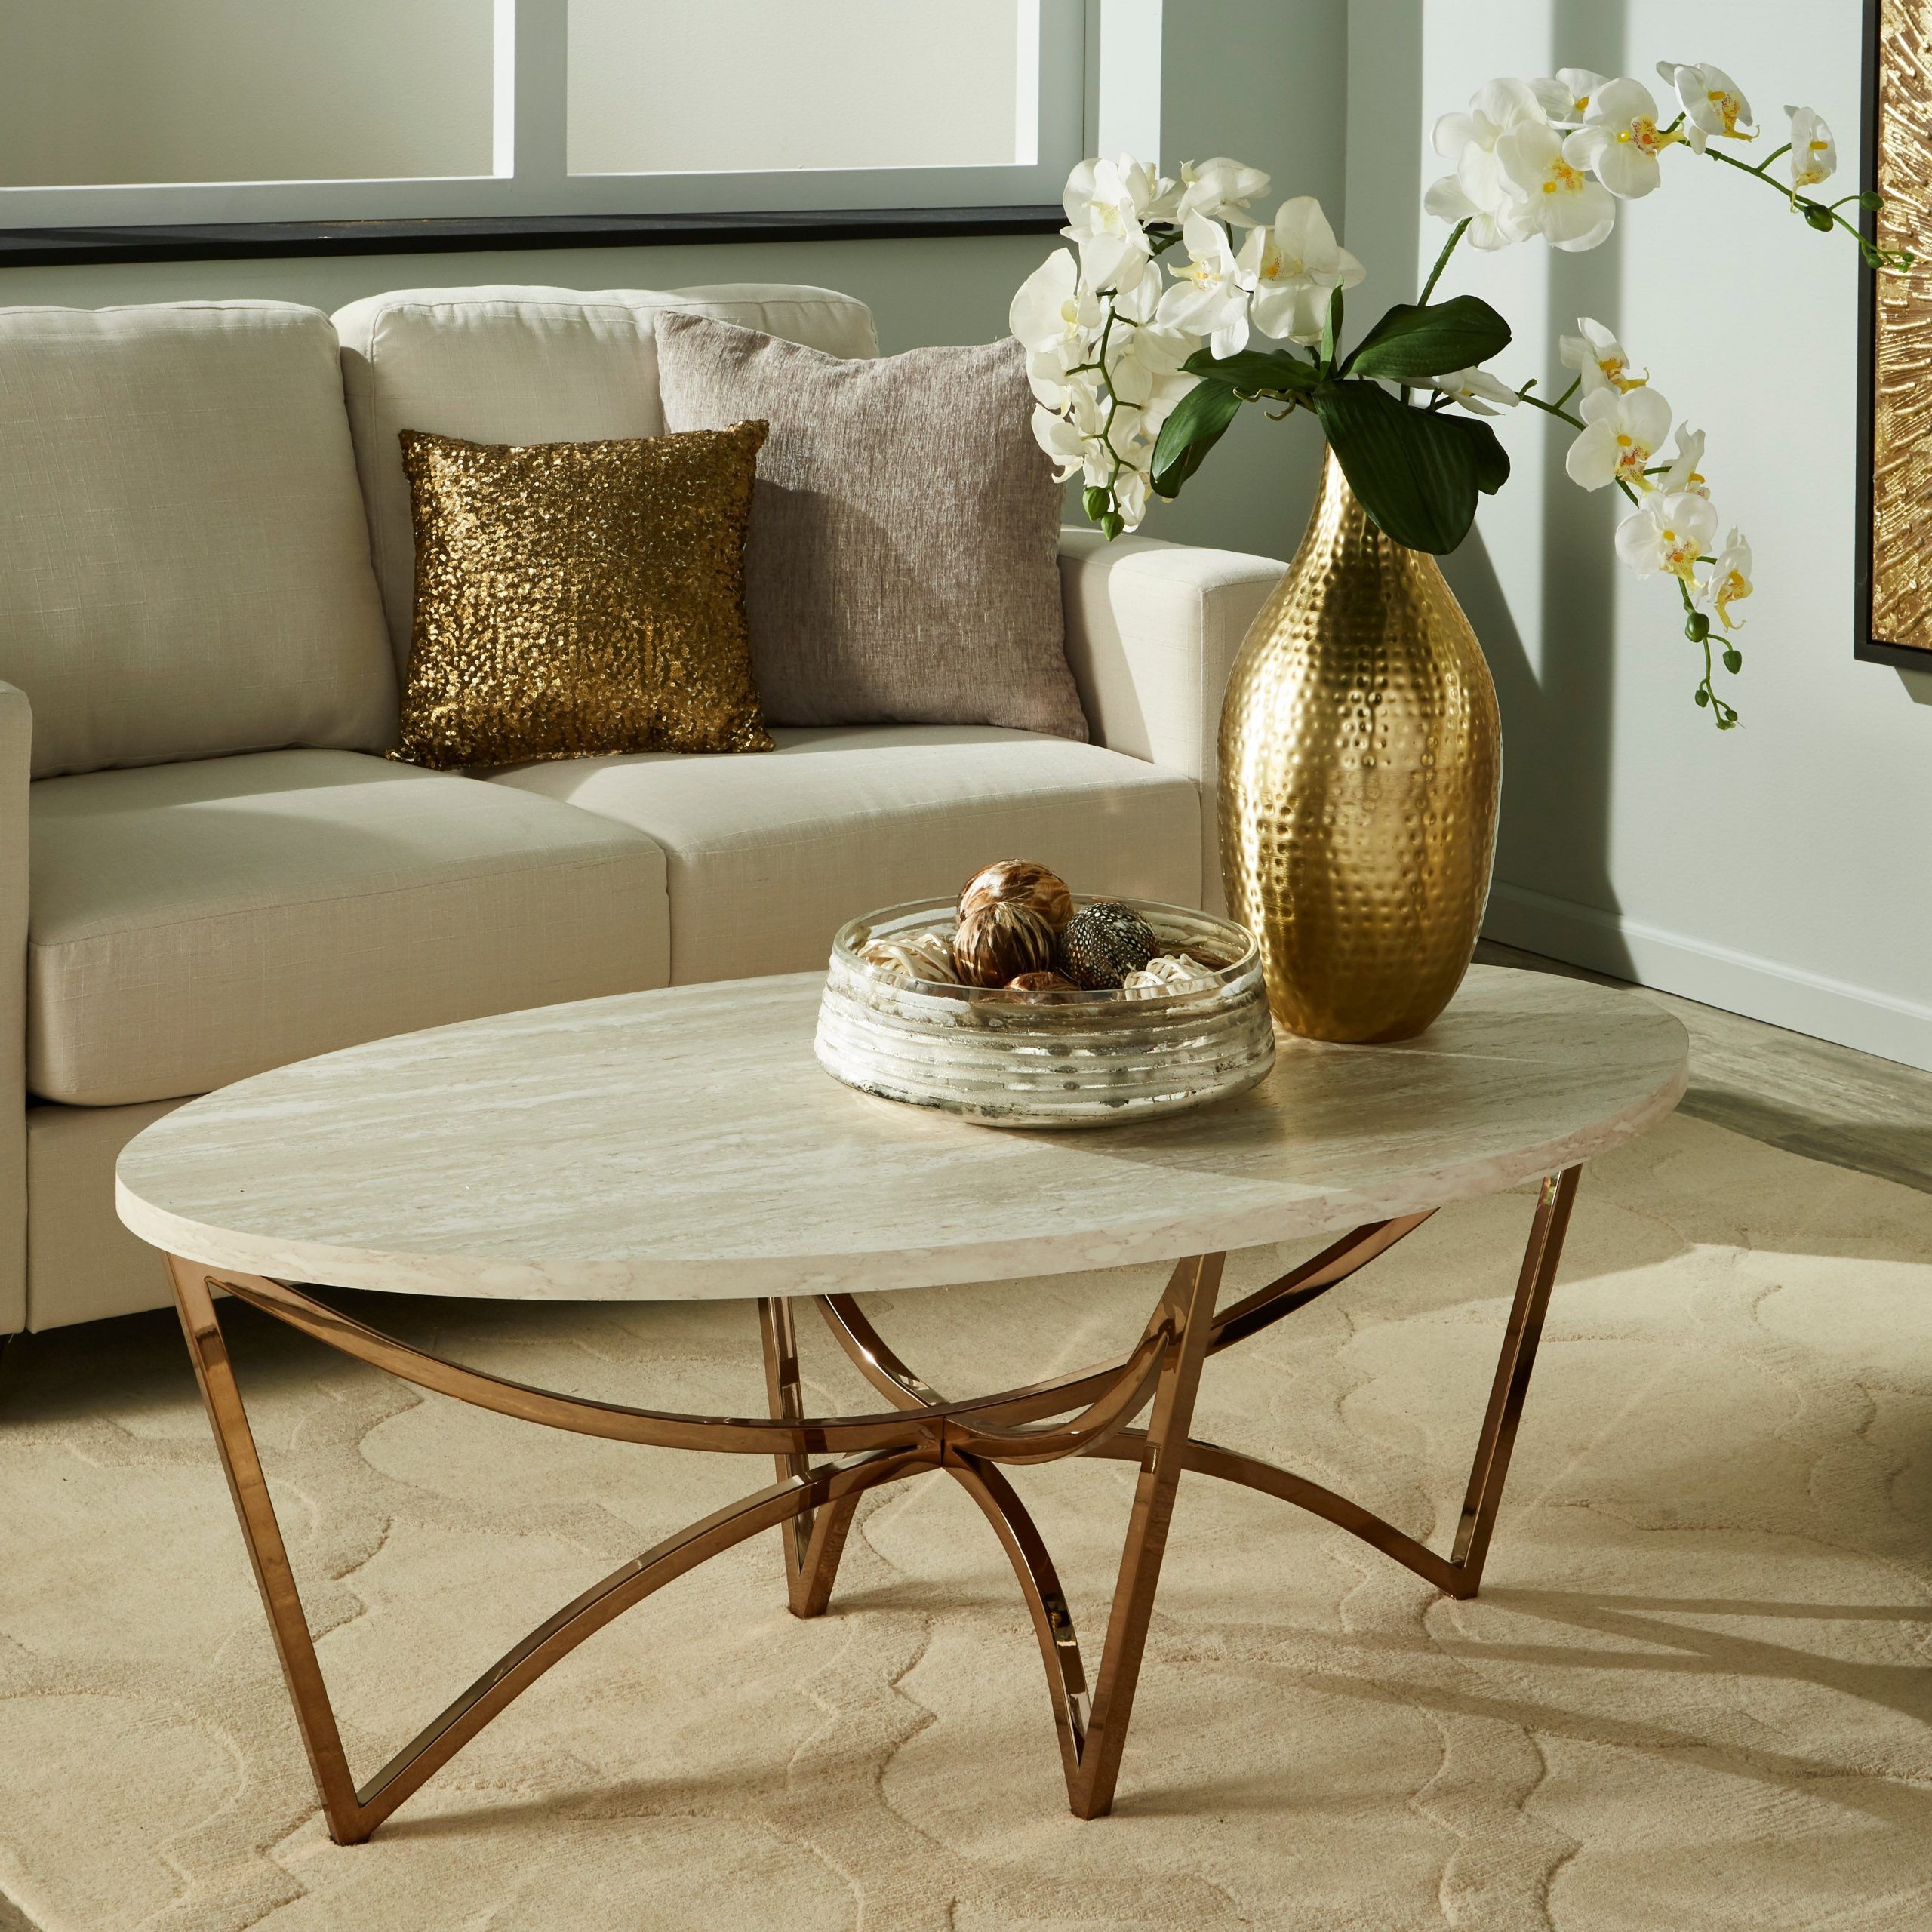 Widely Used Gottlieb Round Glass Gold Coffee Table / Vittoria In Round Coffee Tables (View 11 of 20)